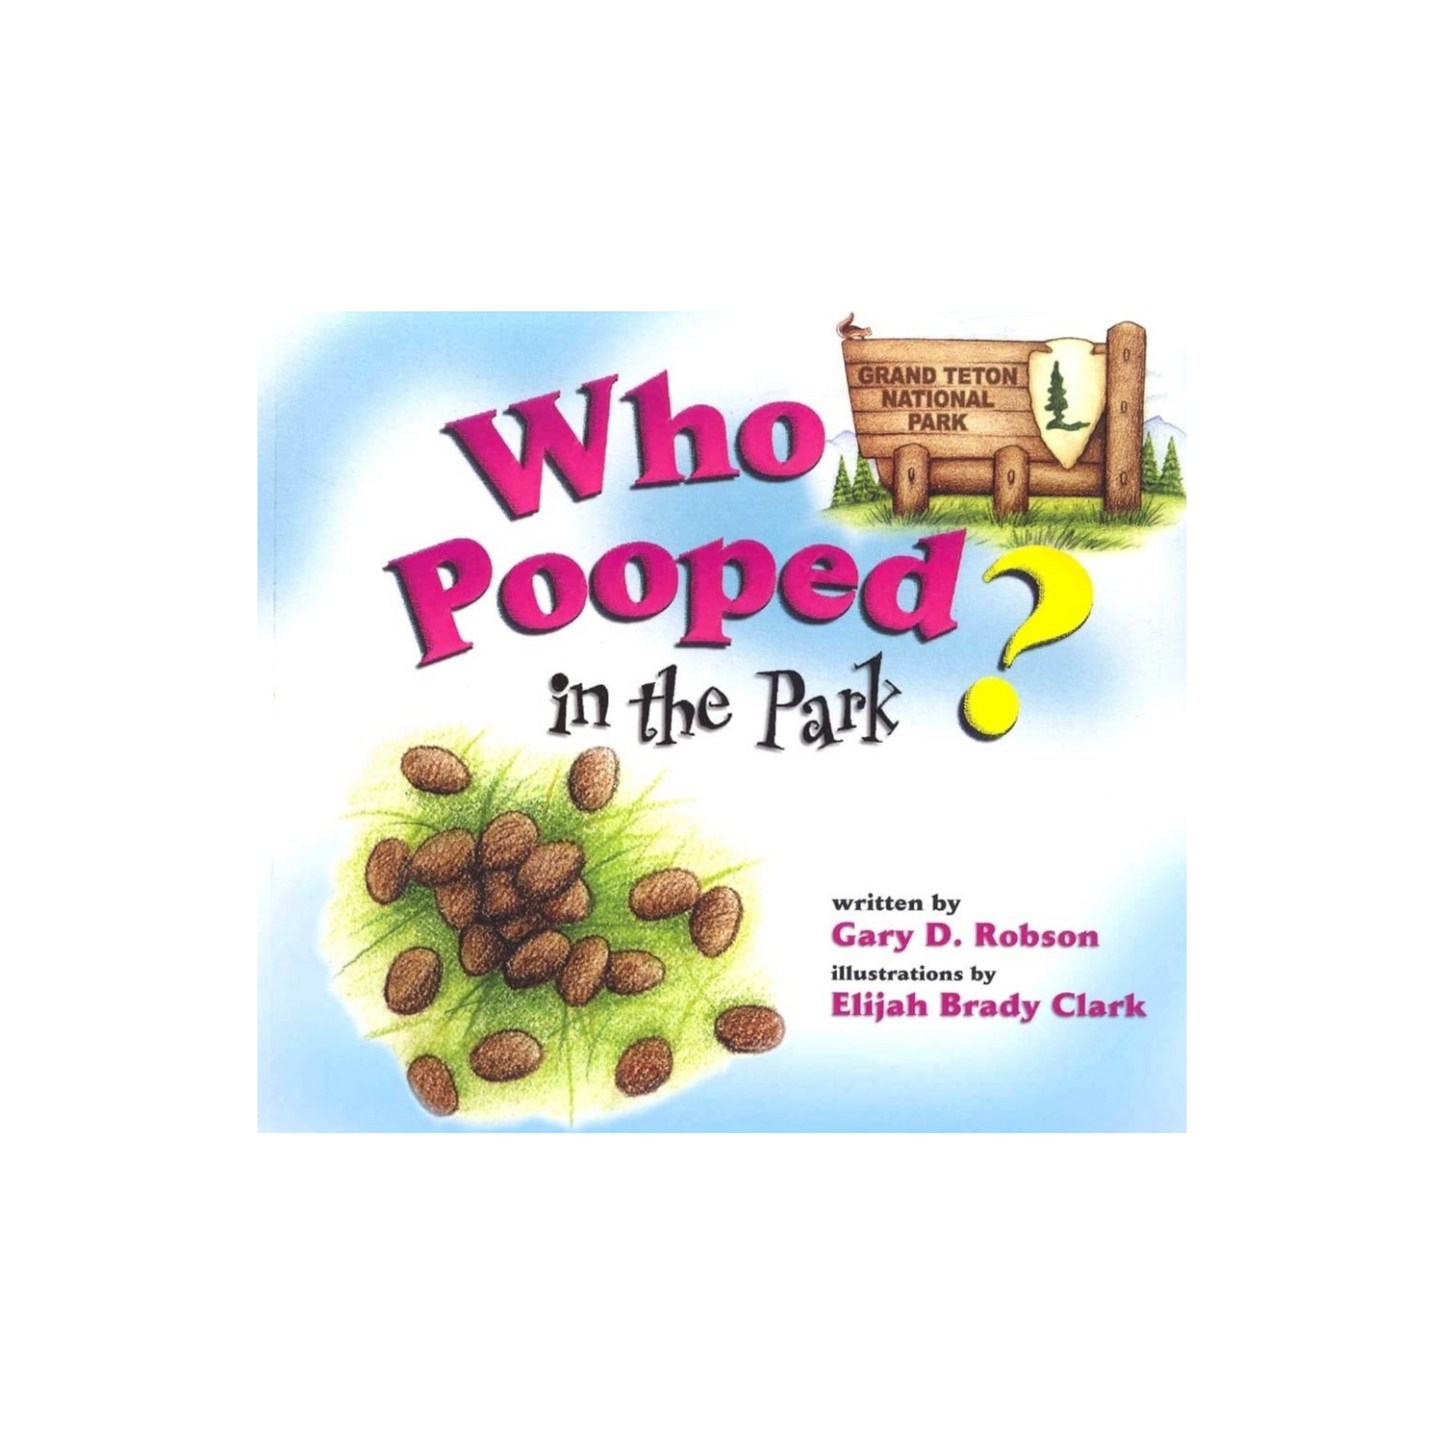 Who Pooped in the Park?: Grand Teton National Park